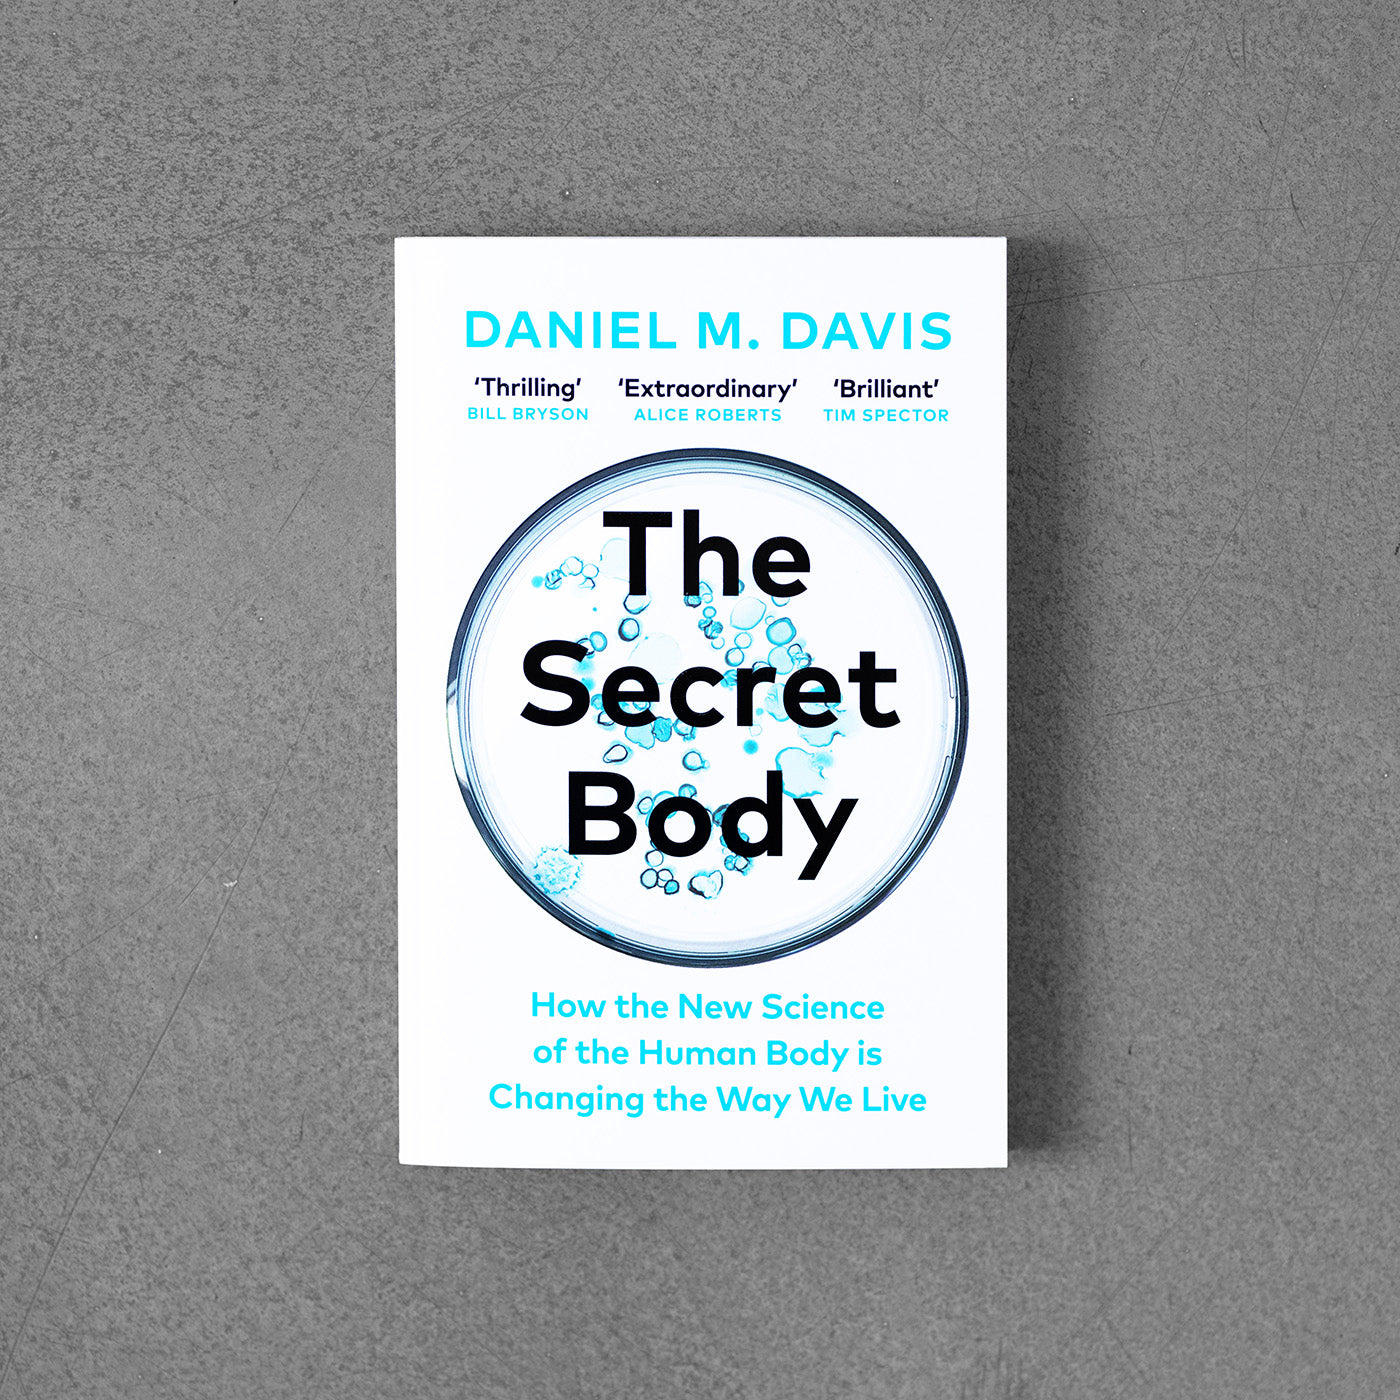 The Secret Body: How the New Science of the Human Body Is Changing